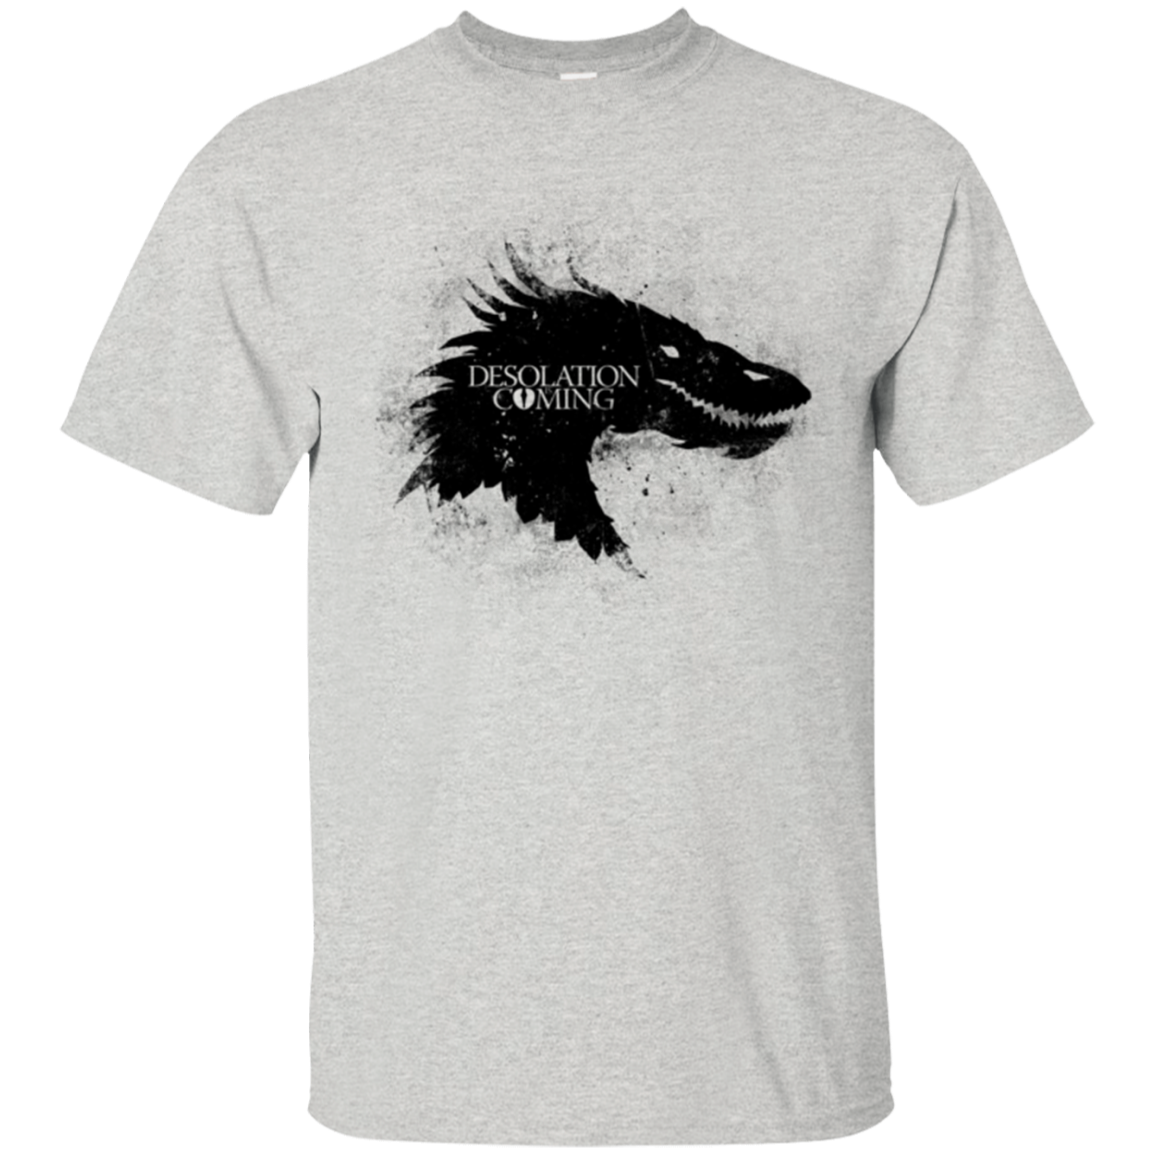 Desolation is Coming T-Shirt